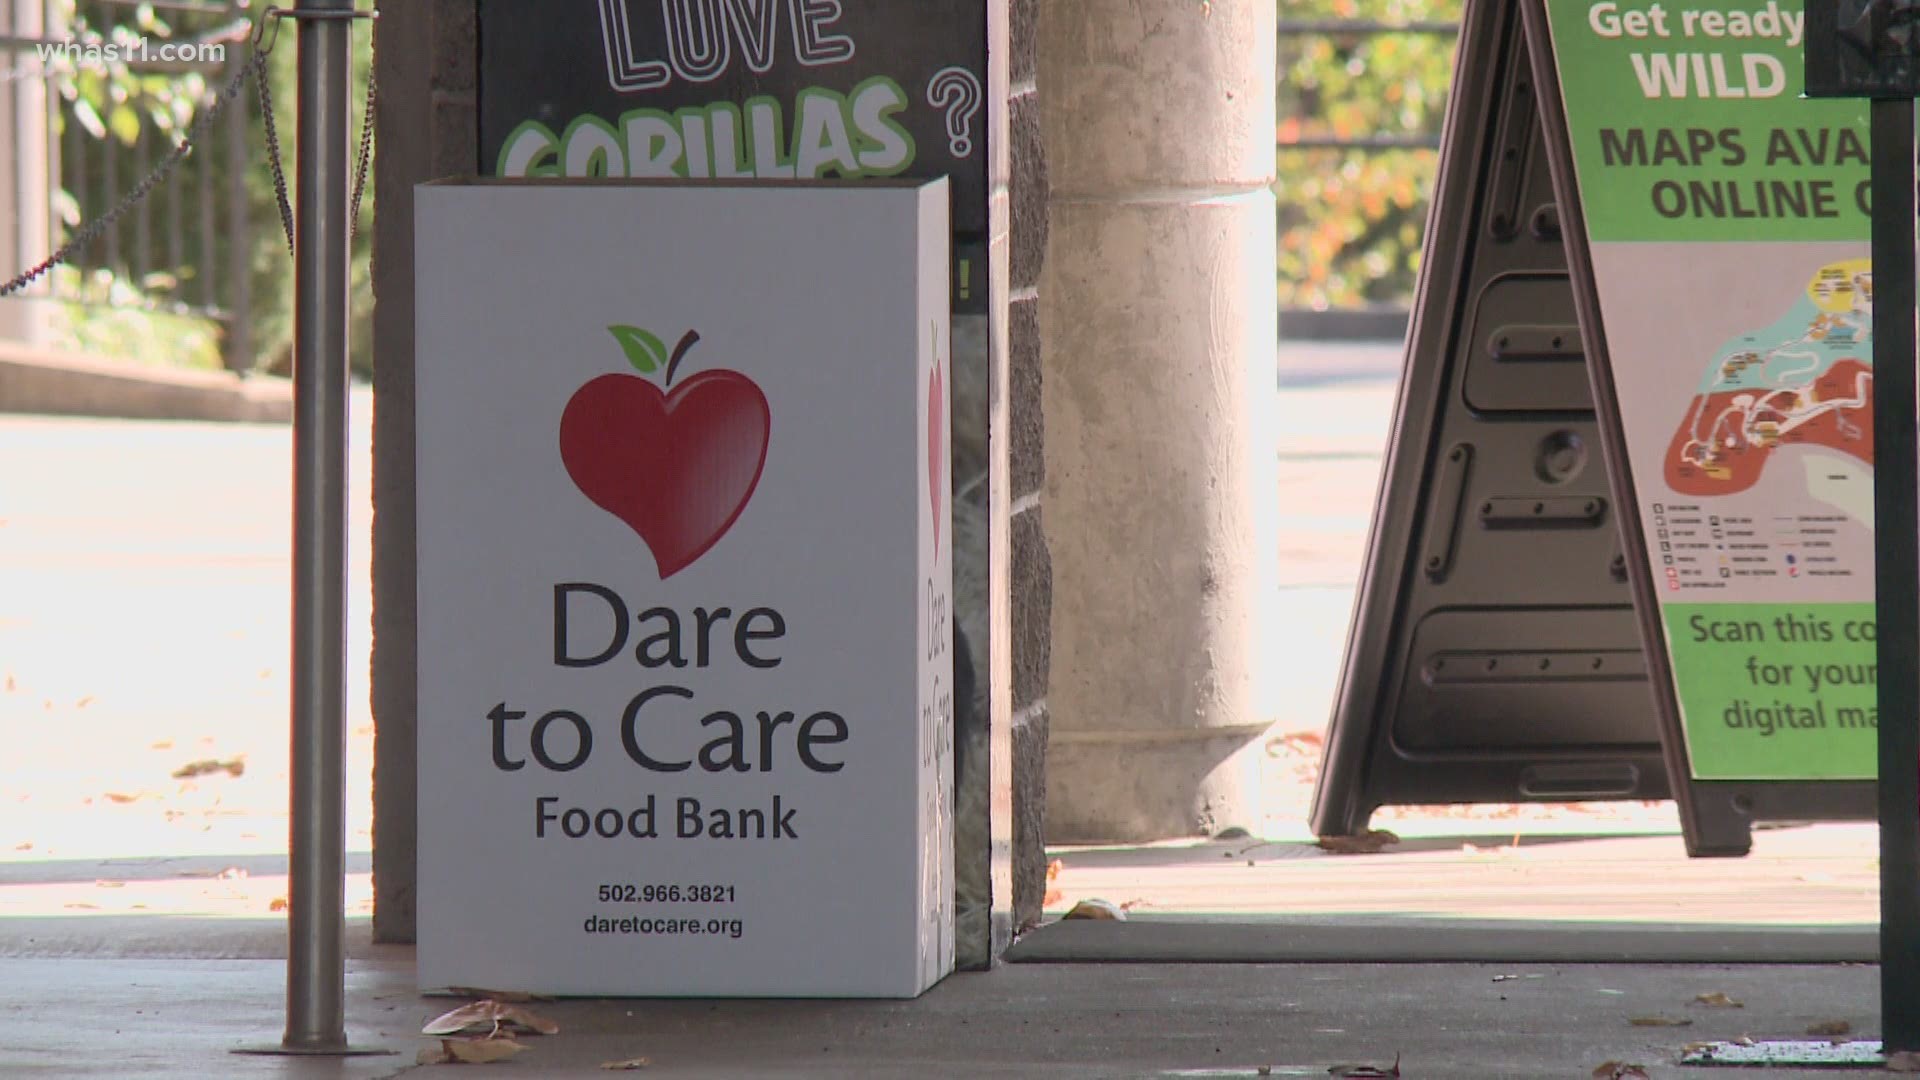 The Zoo teamed up with Kroger and Dare to Care for a food drive.